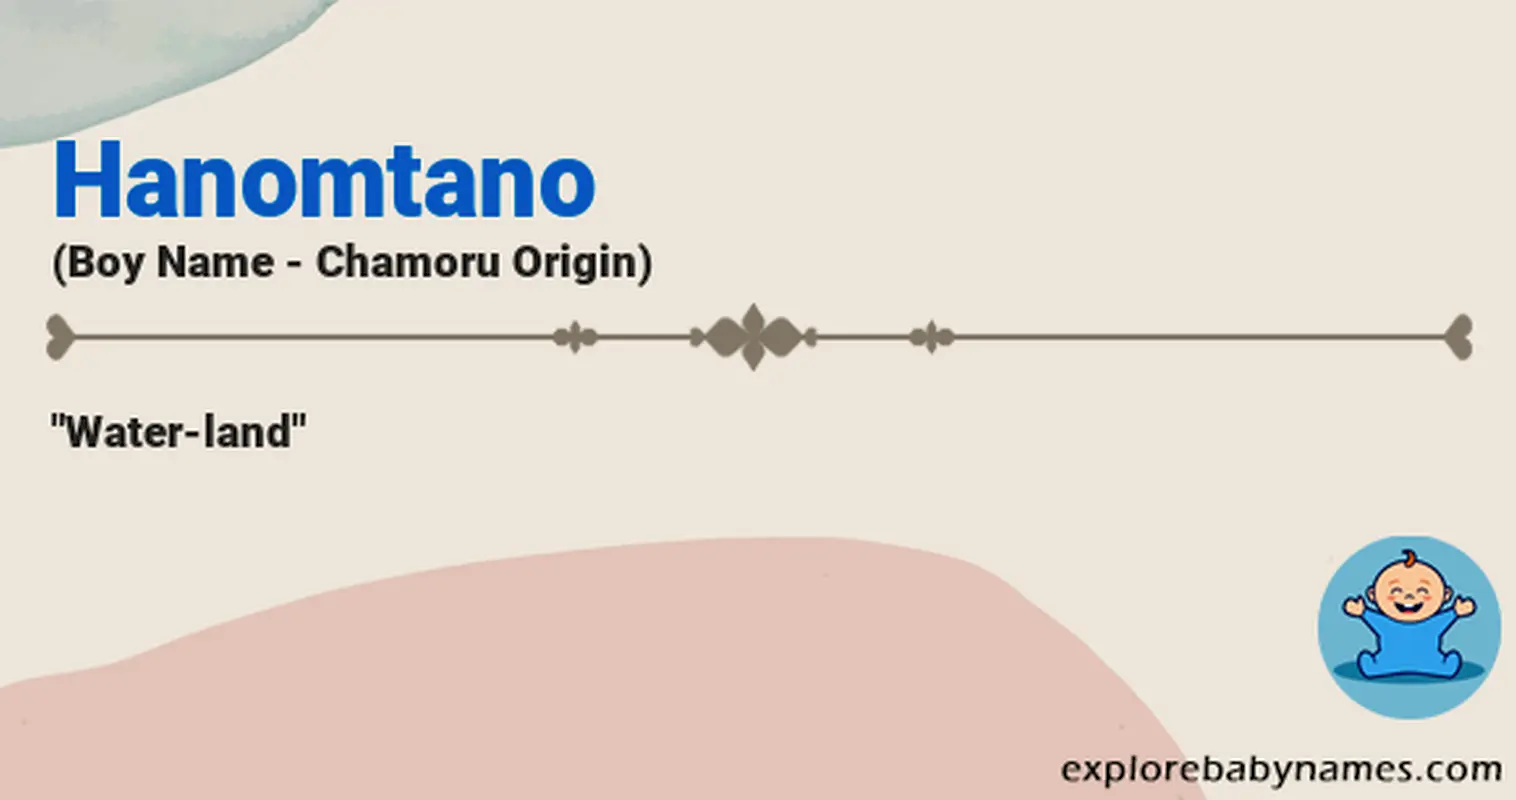 Meaning of Hanomtano